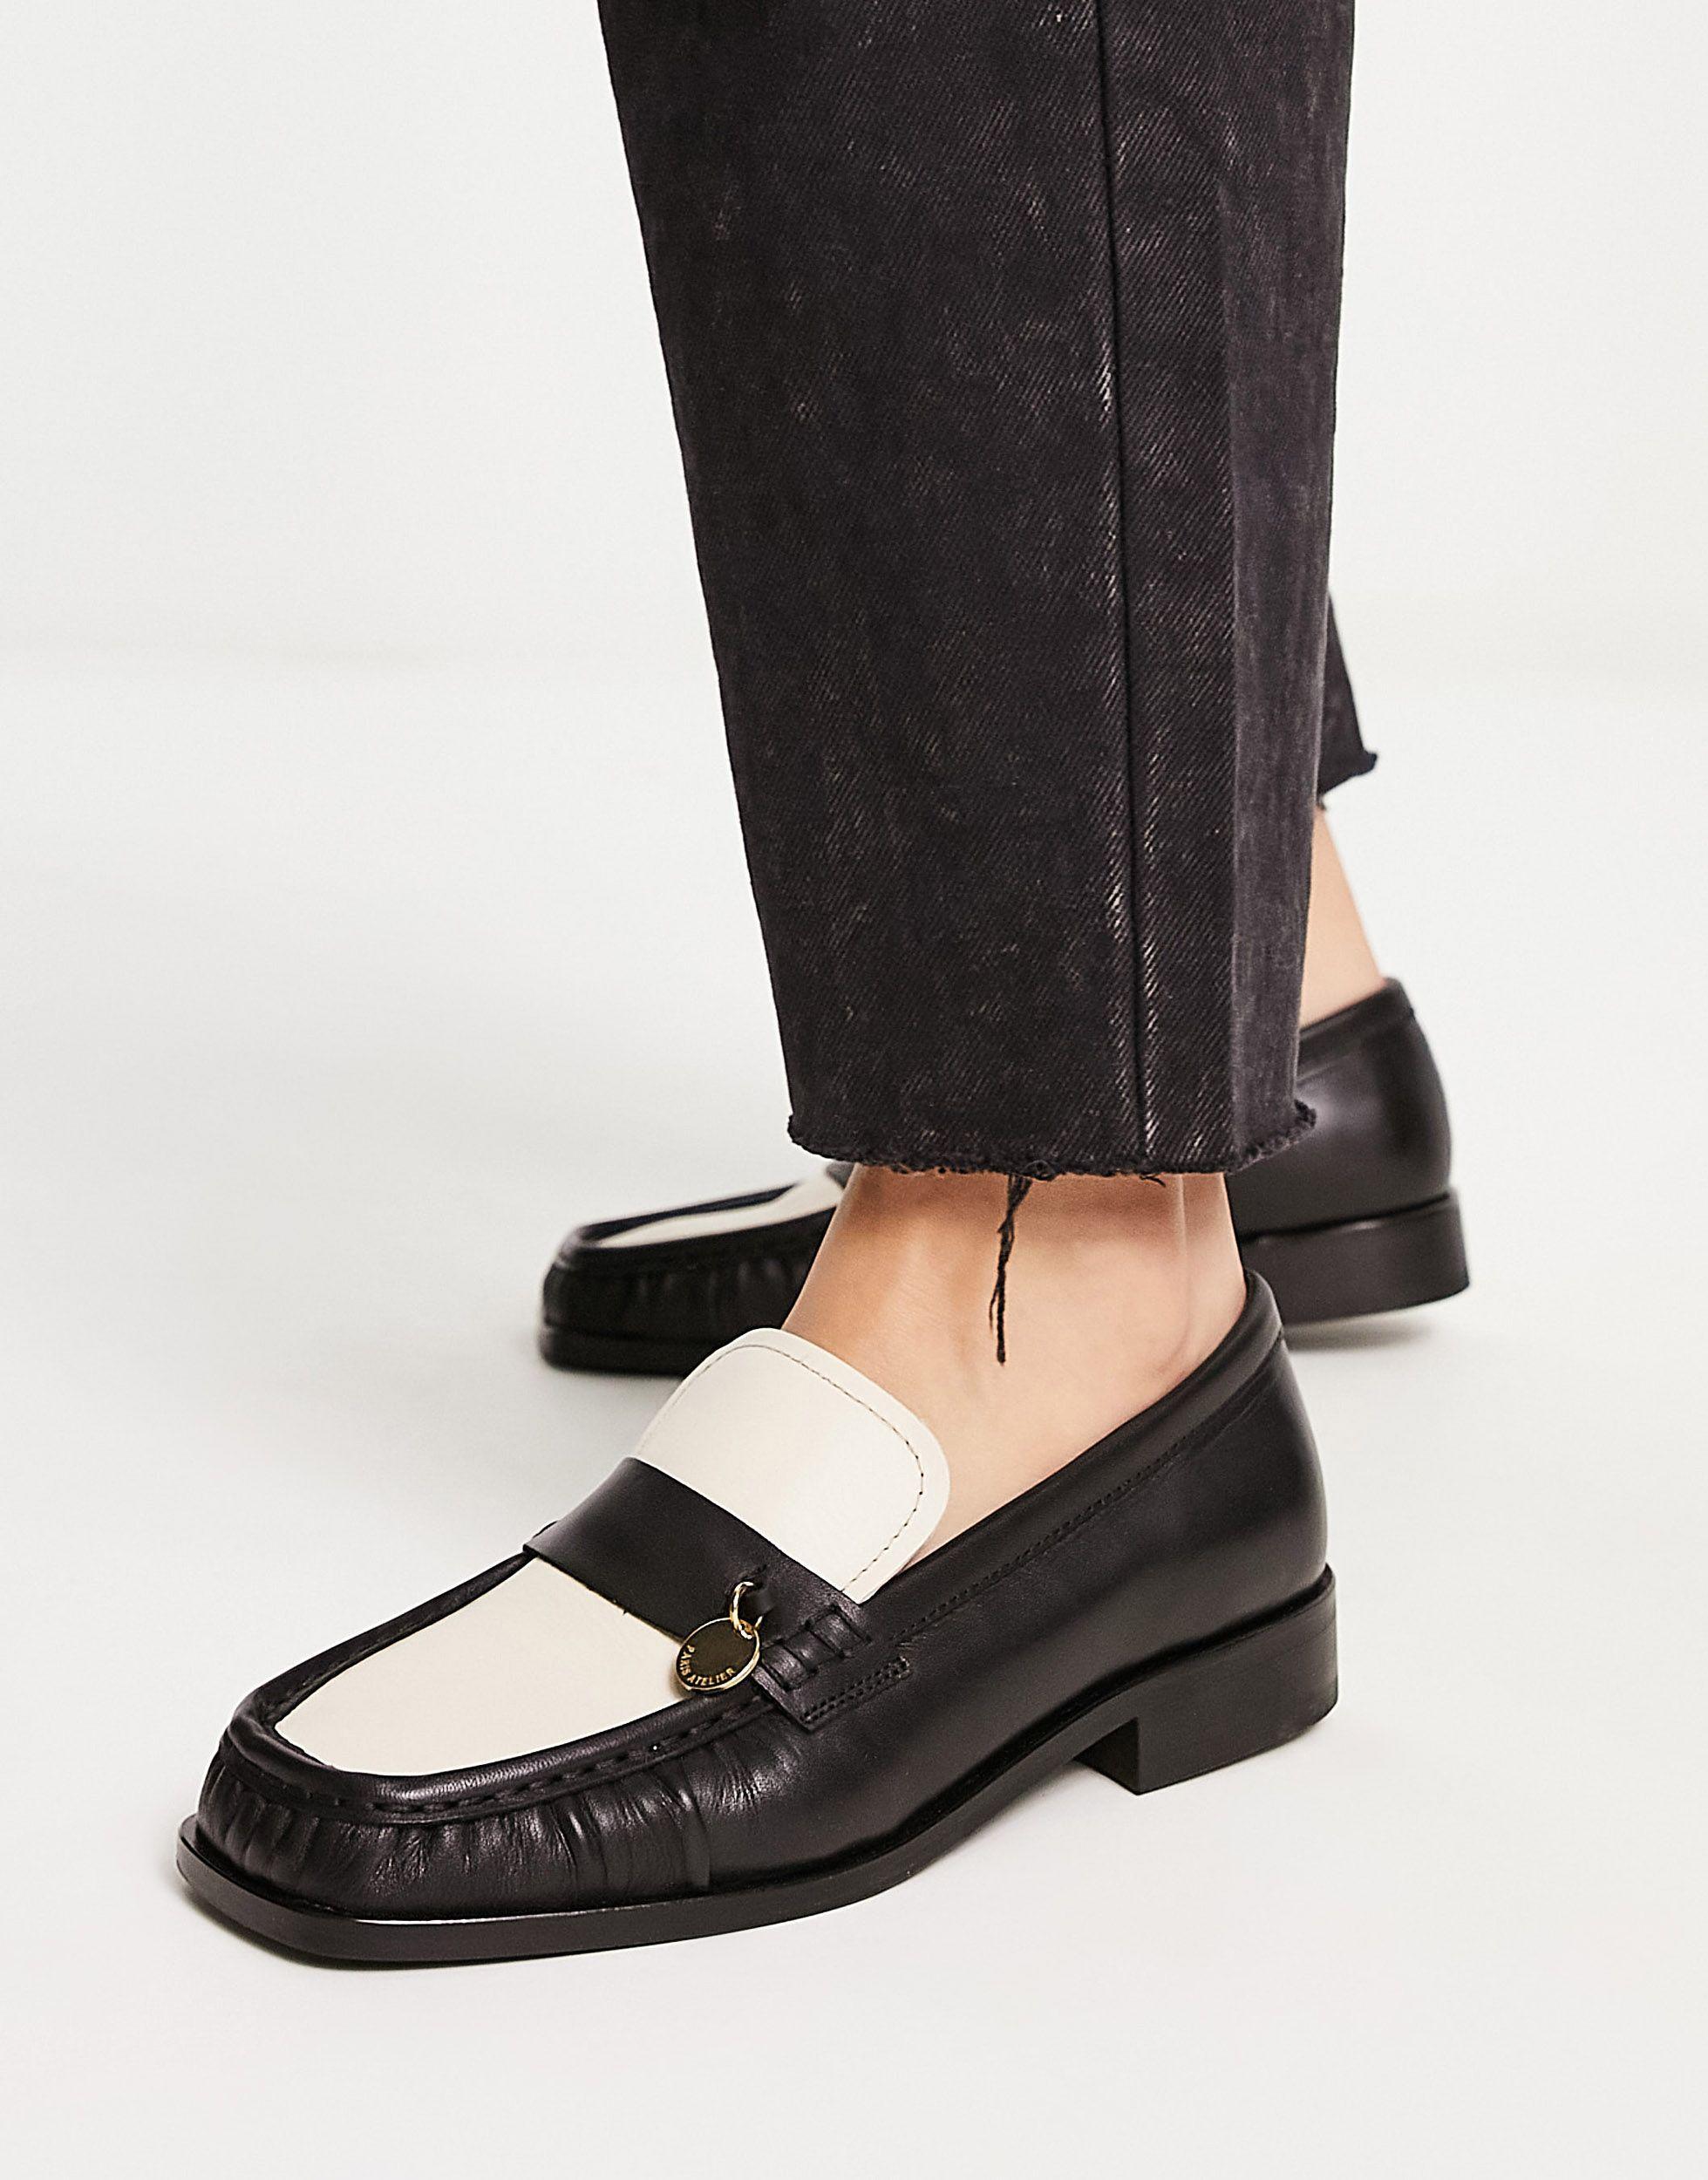 & Other Stories Leather Two Tone Loafer Shoes in Black | Lyst